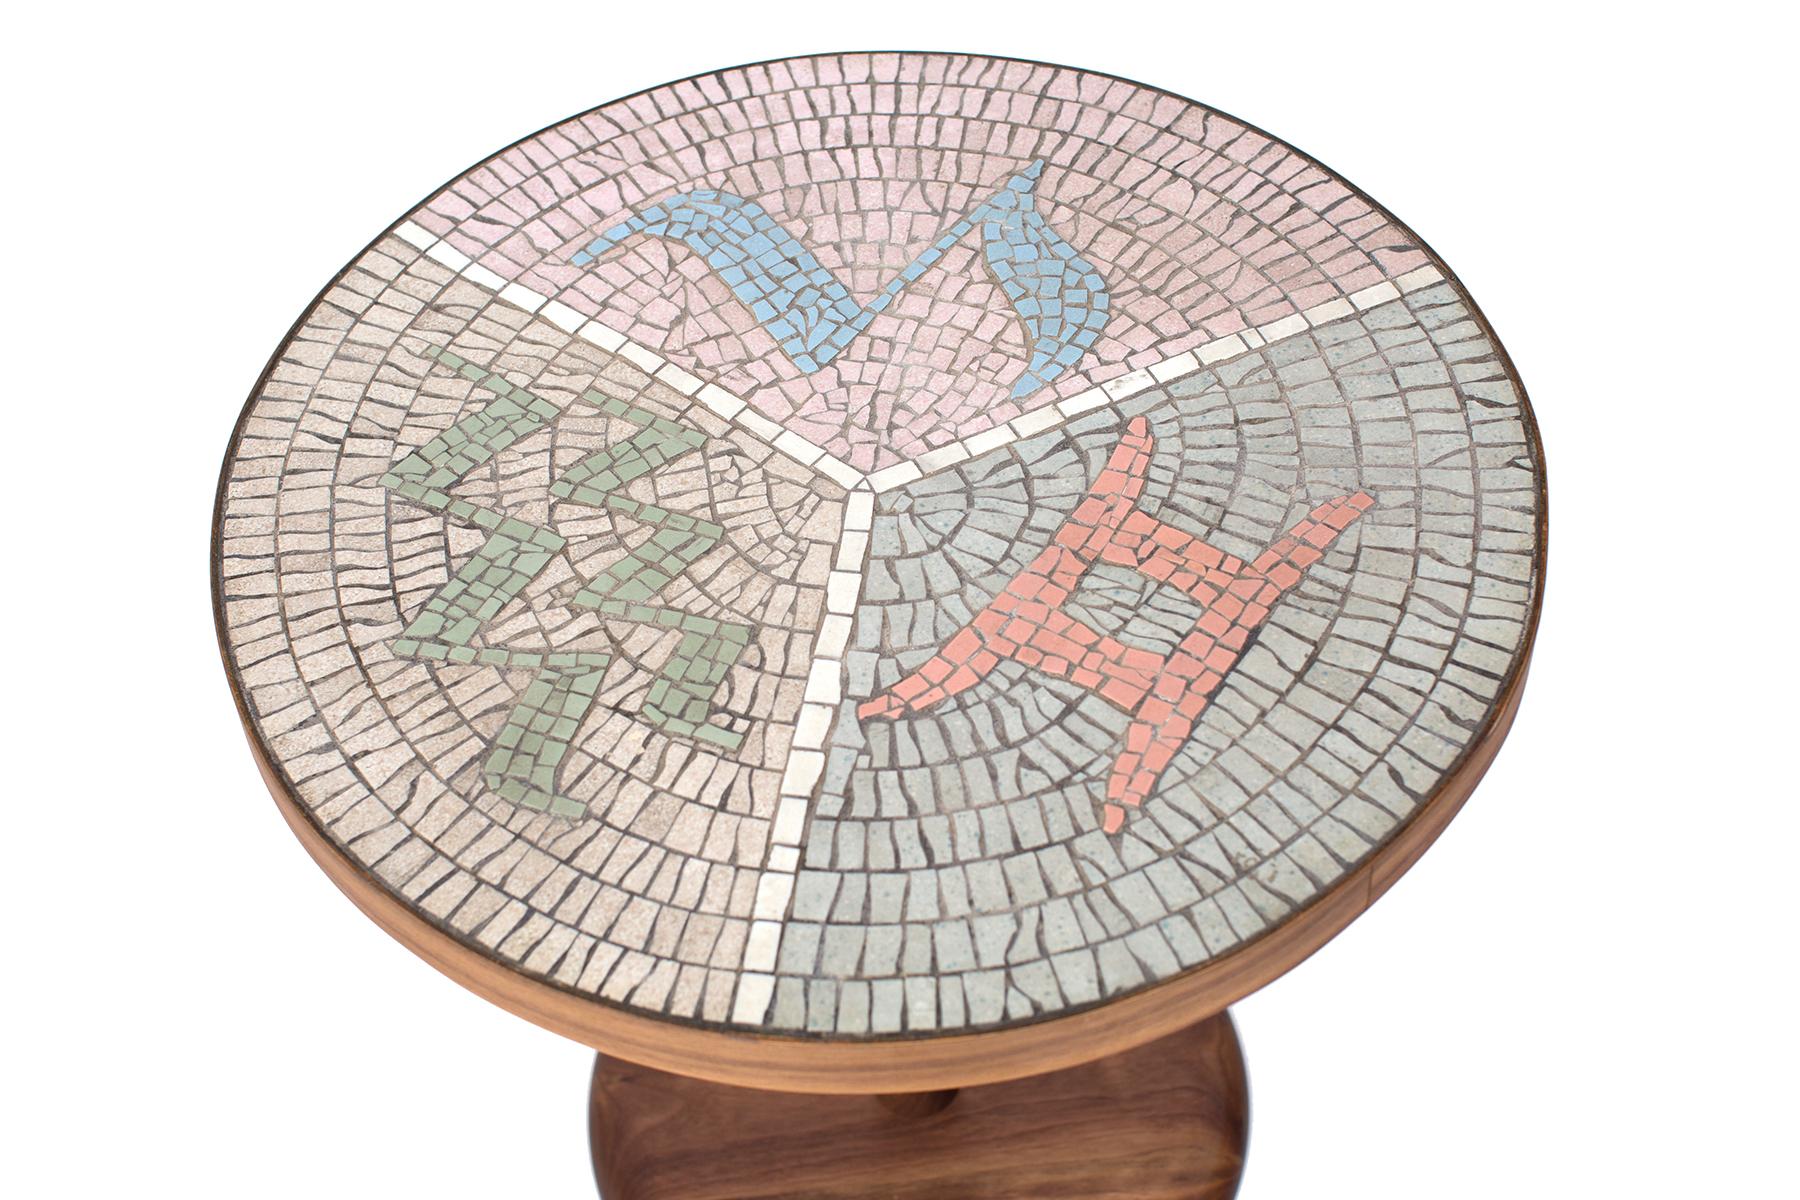 Mosaic tile and walnut side table, circa mid-1960s.
This custom example has an intricate and stunning mosaic top and solid walnut base.